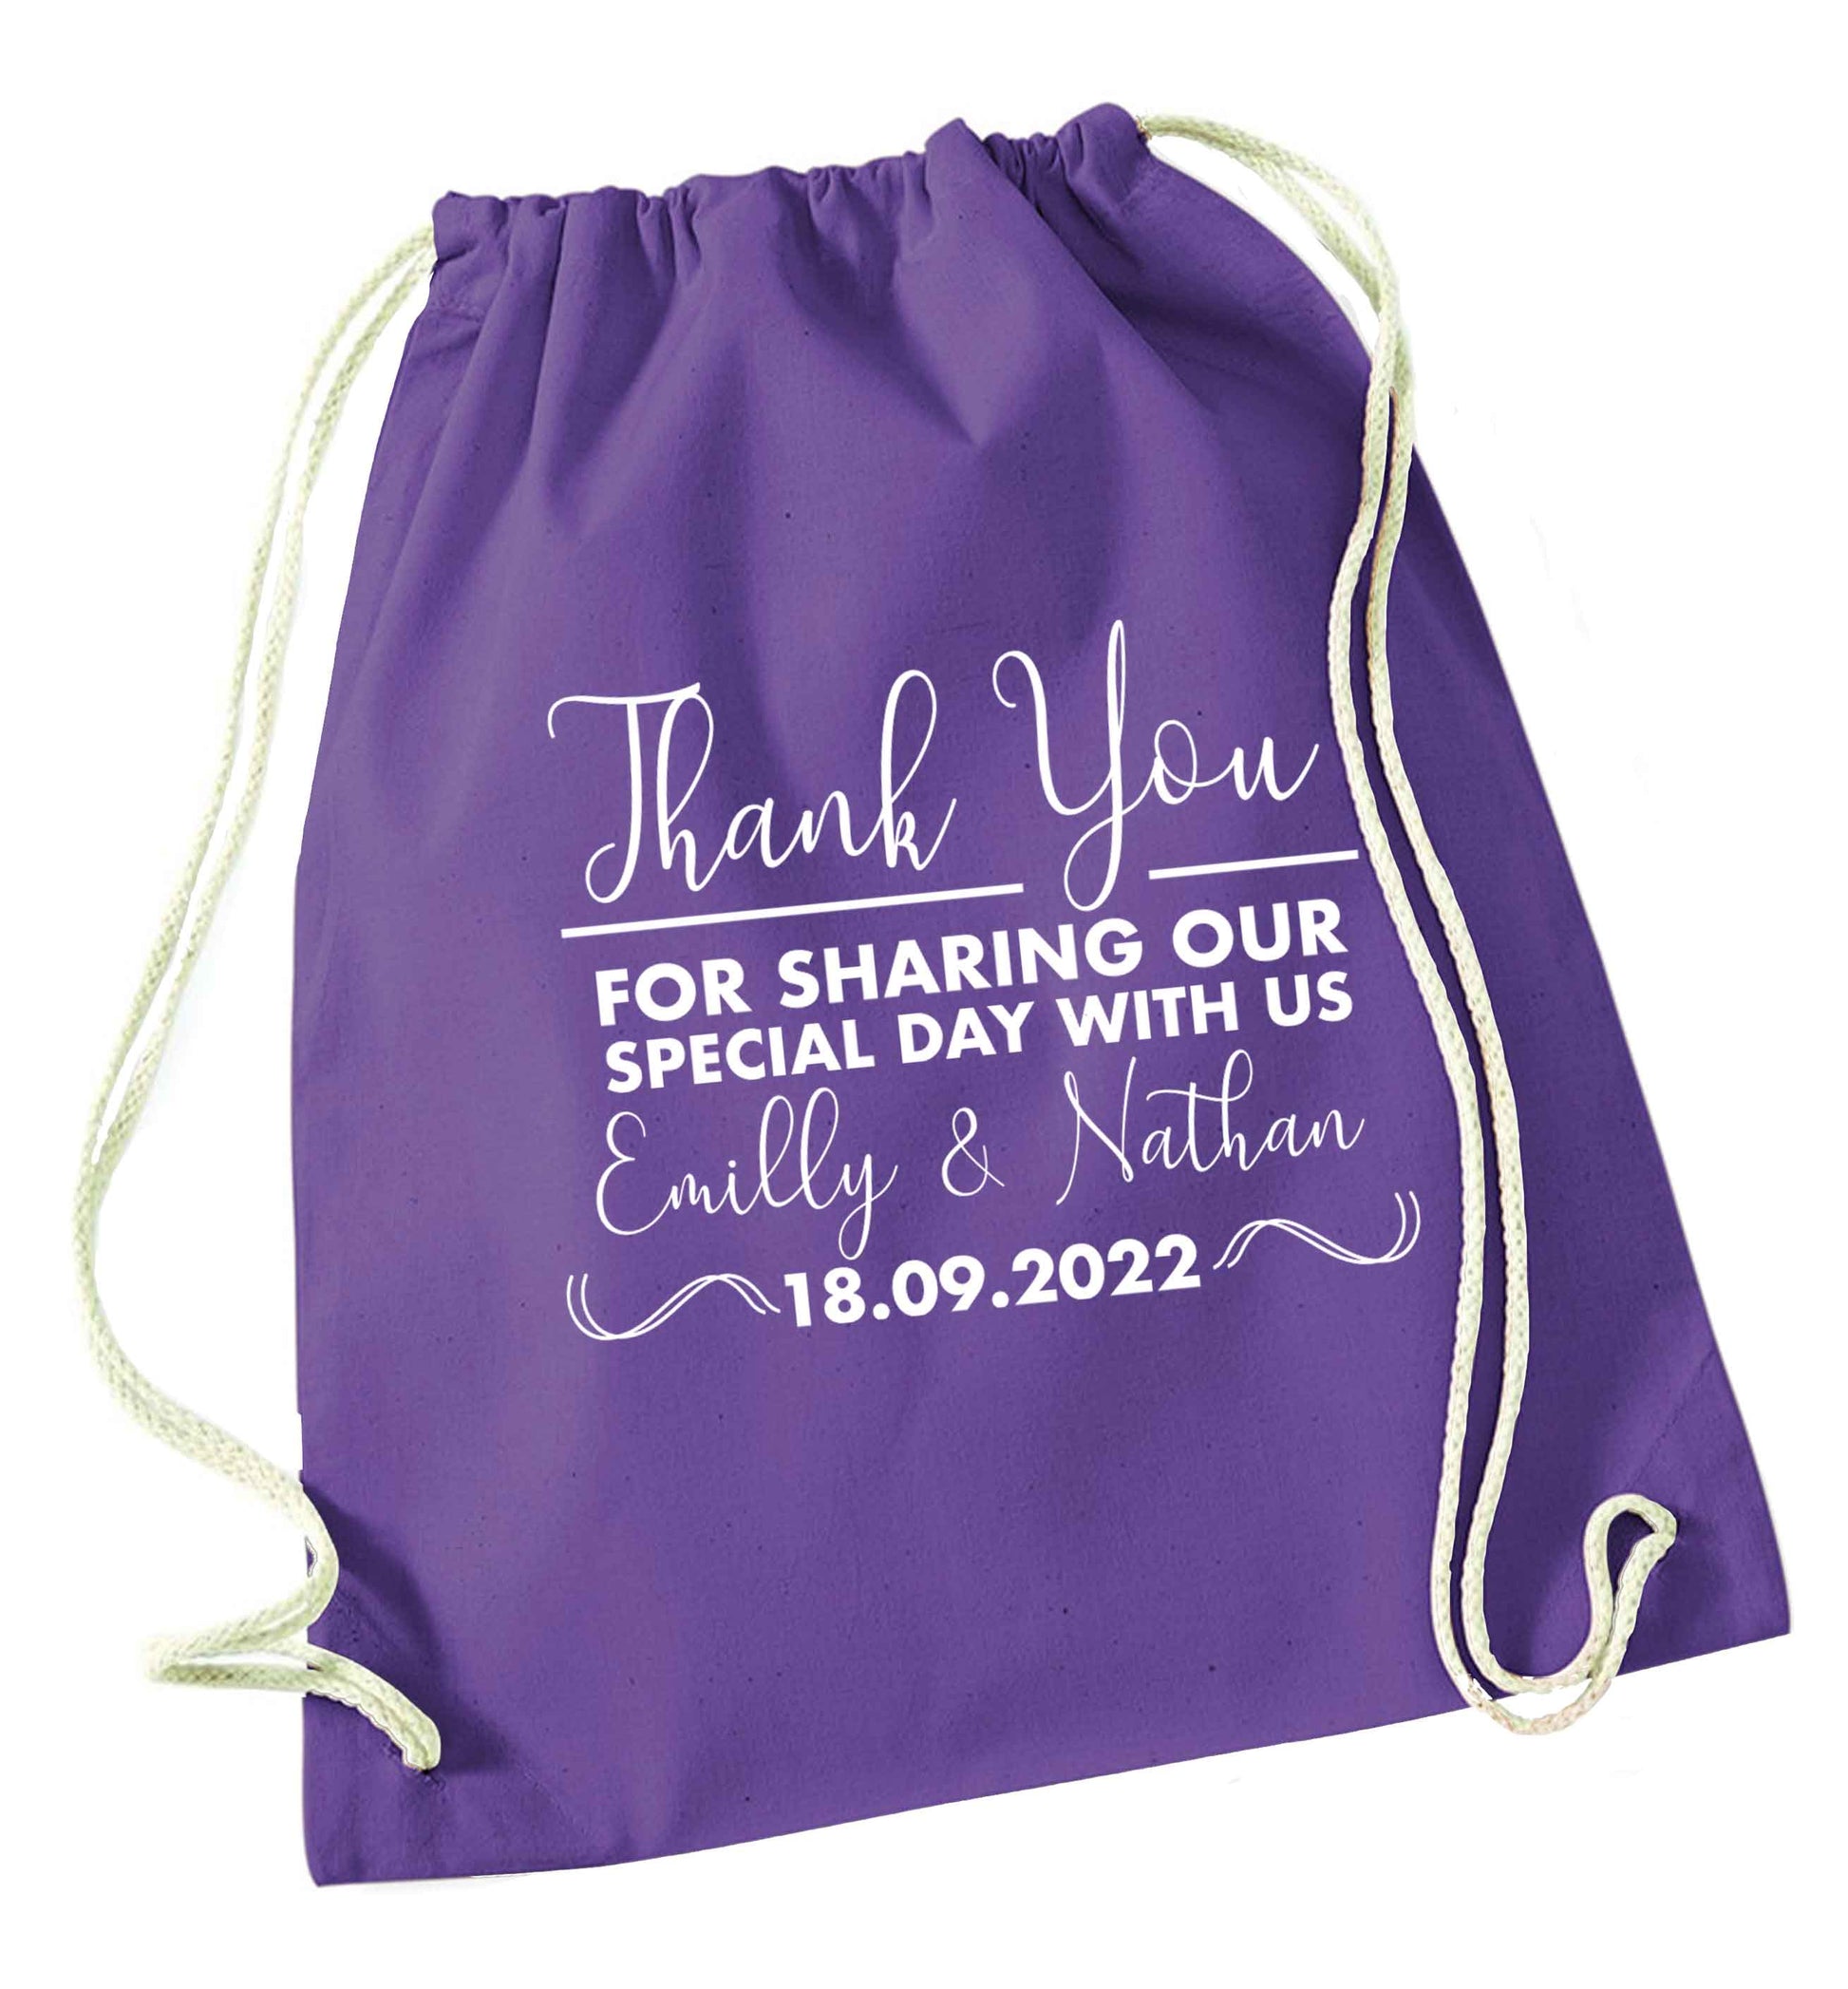 Gorgeous personalised and customisable wedding favour gifts! purple drawstring bag